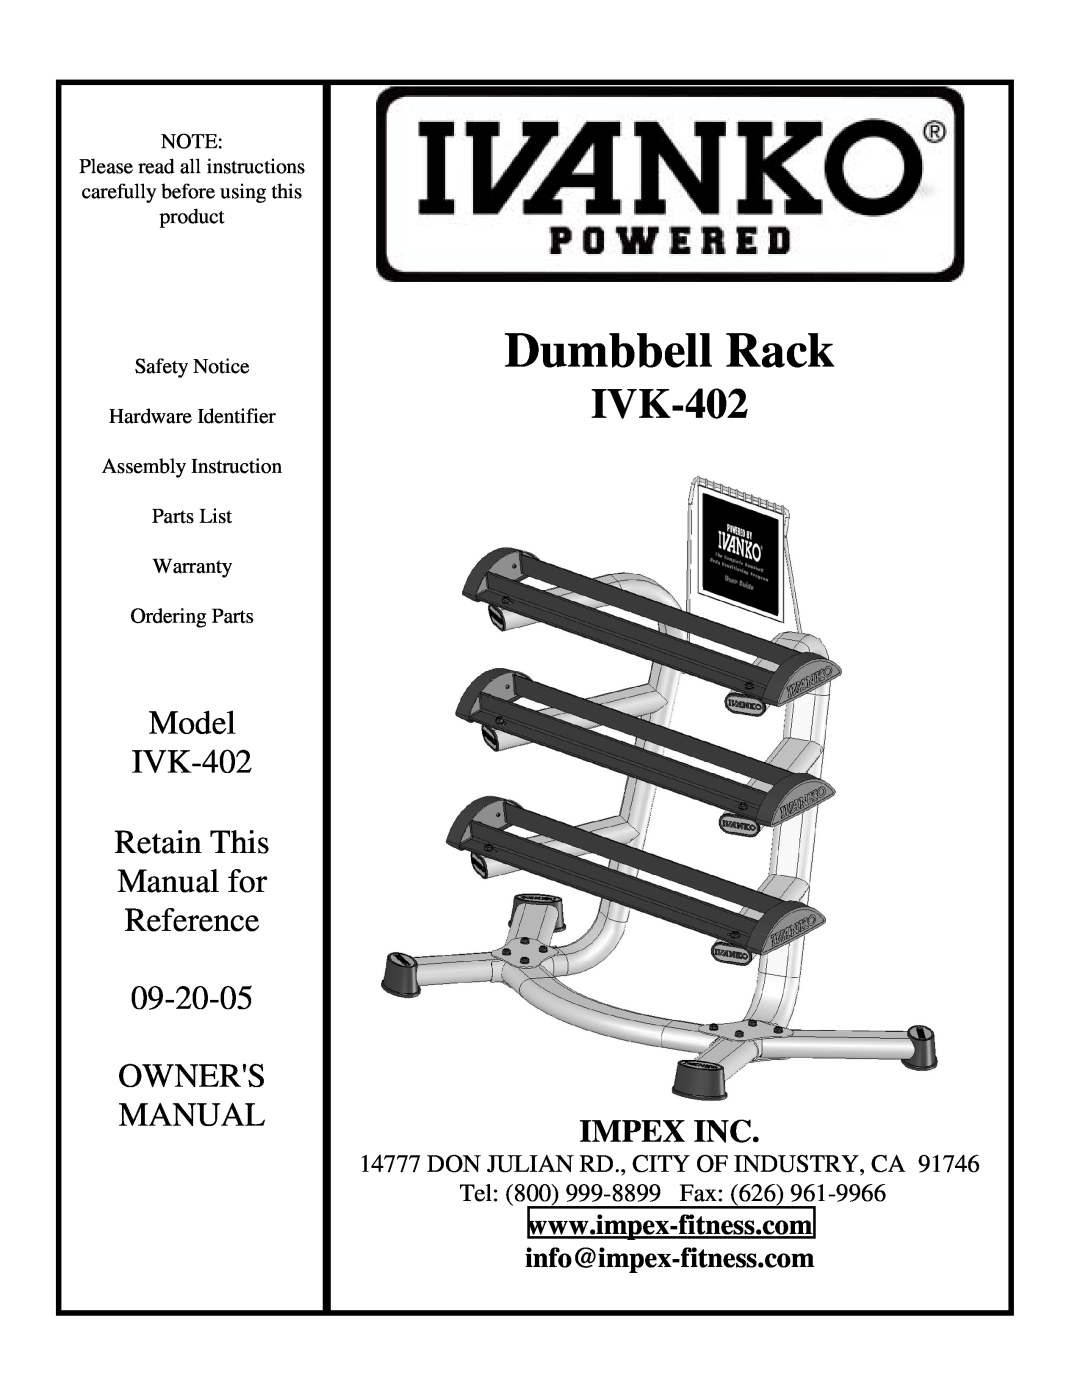 Impex manual Dumbbell Rack, Model IVK-402 Retain This Manual for Reference 09-20-05 OWNERS MANUAL, Impex Inc 